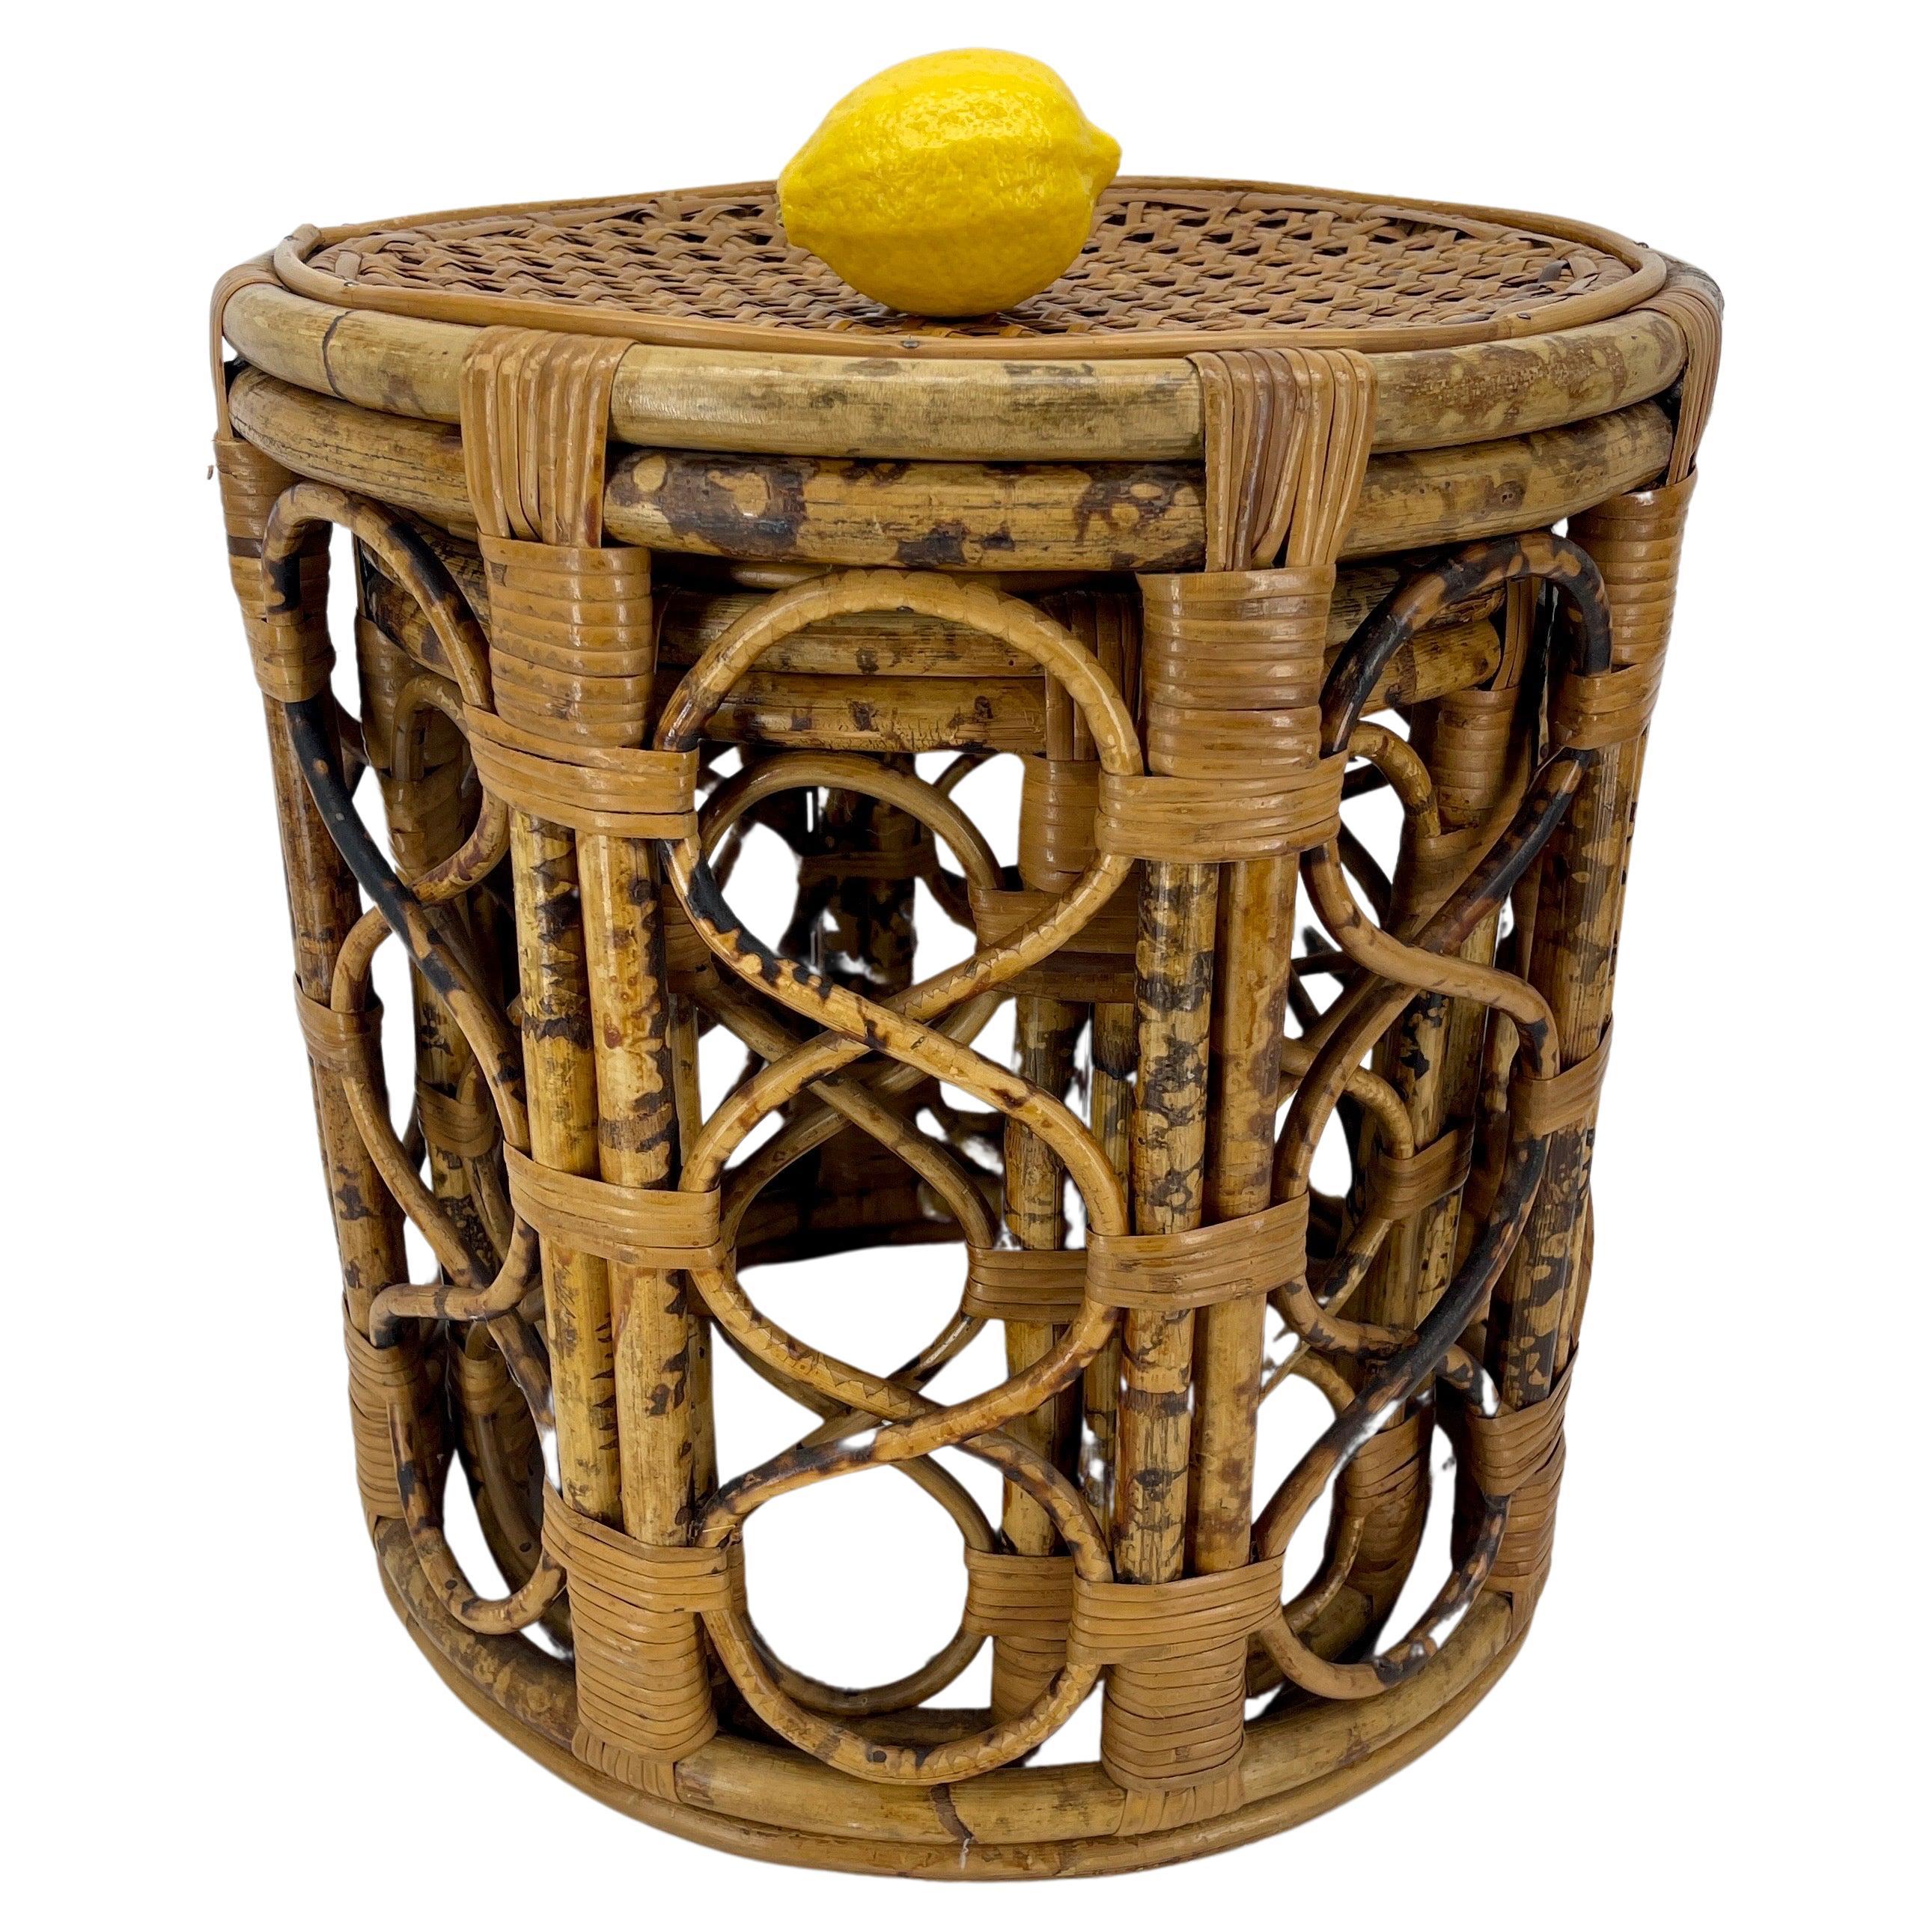 Hand-Crafted Midcentury Tortoise Bamboo Rattan Round Nesting Tables